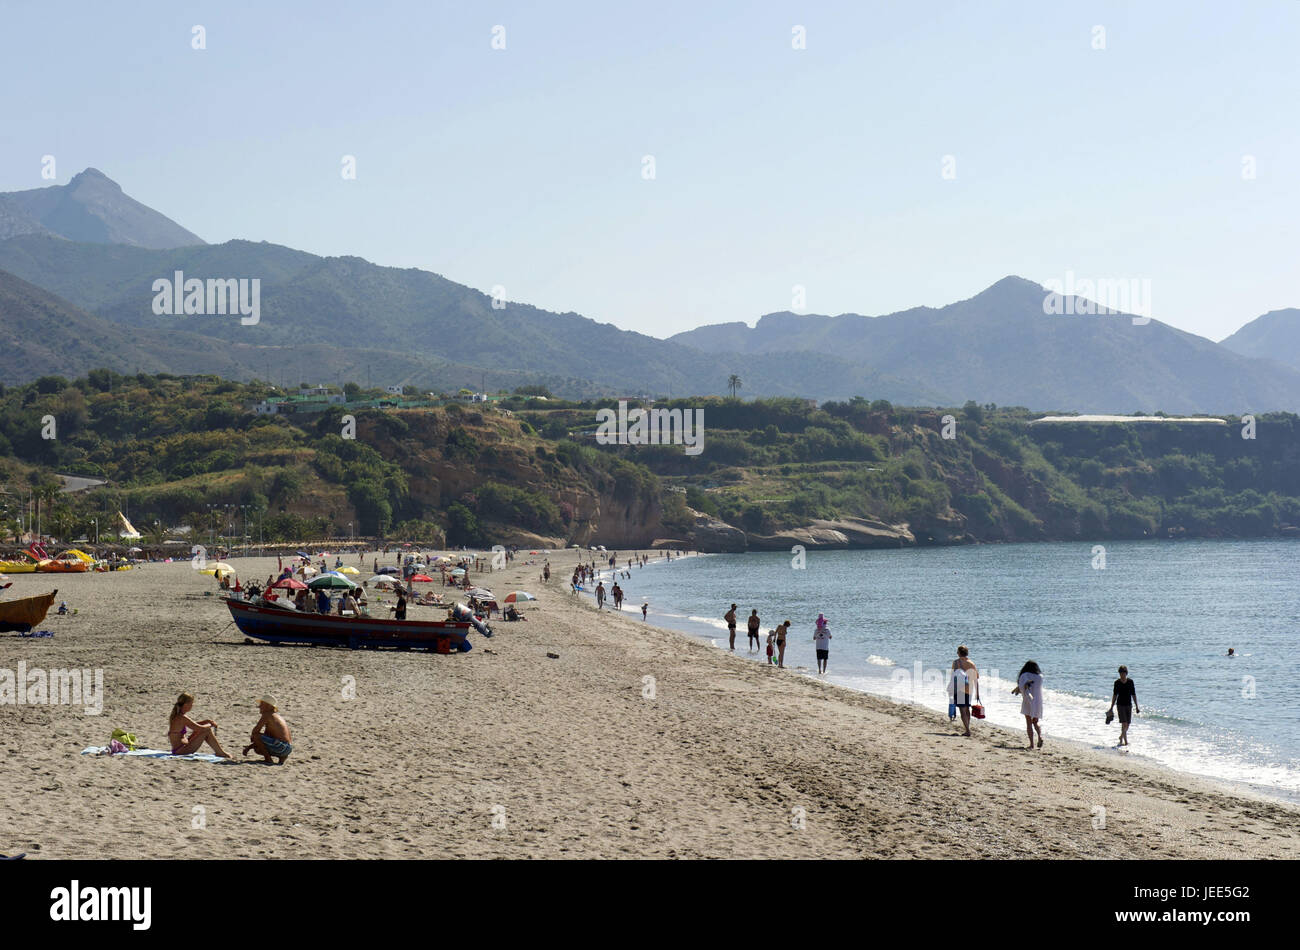 Spain, Andalusia, Costa del Sol, Nerja, vacationer on the beach, Stock Photo